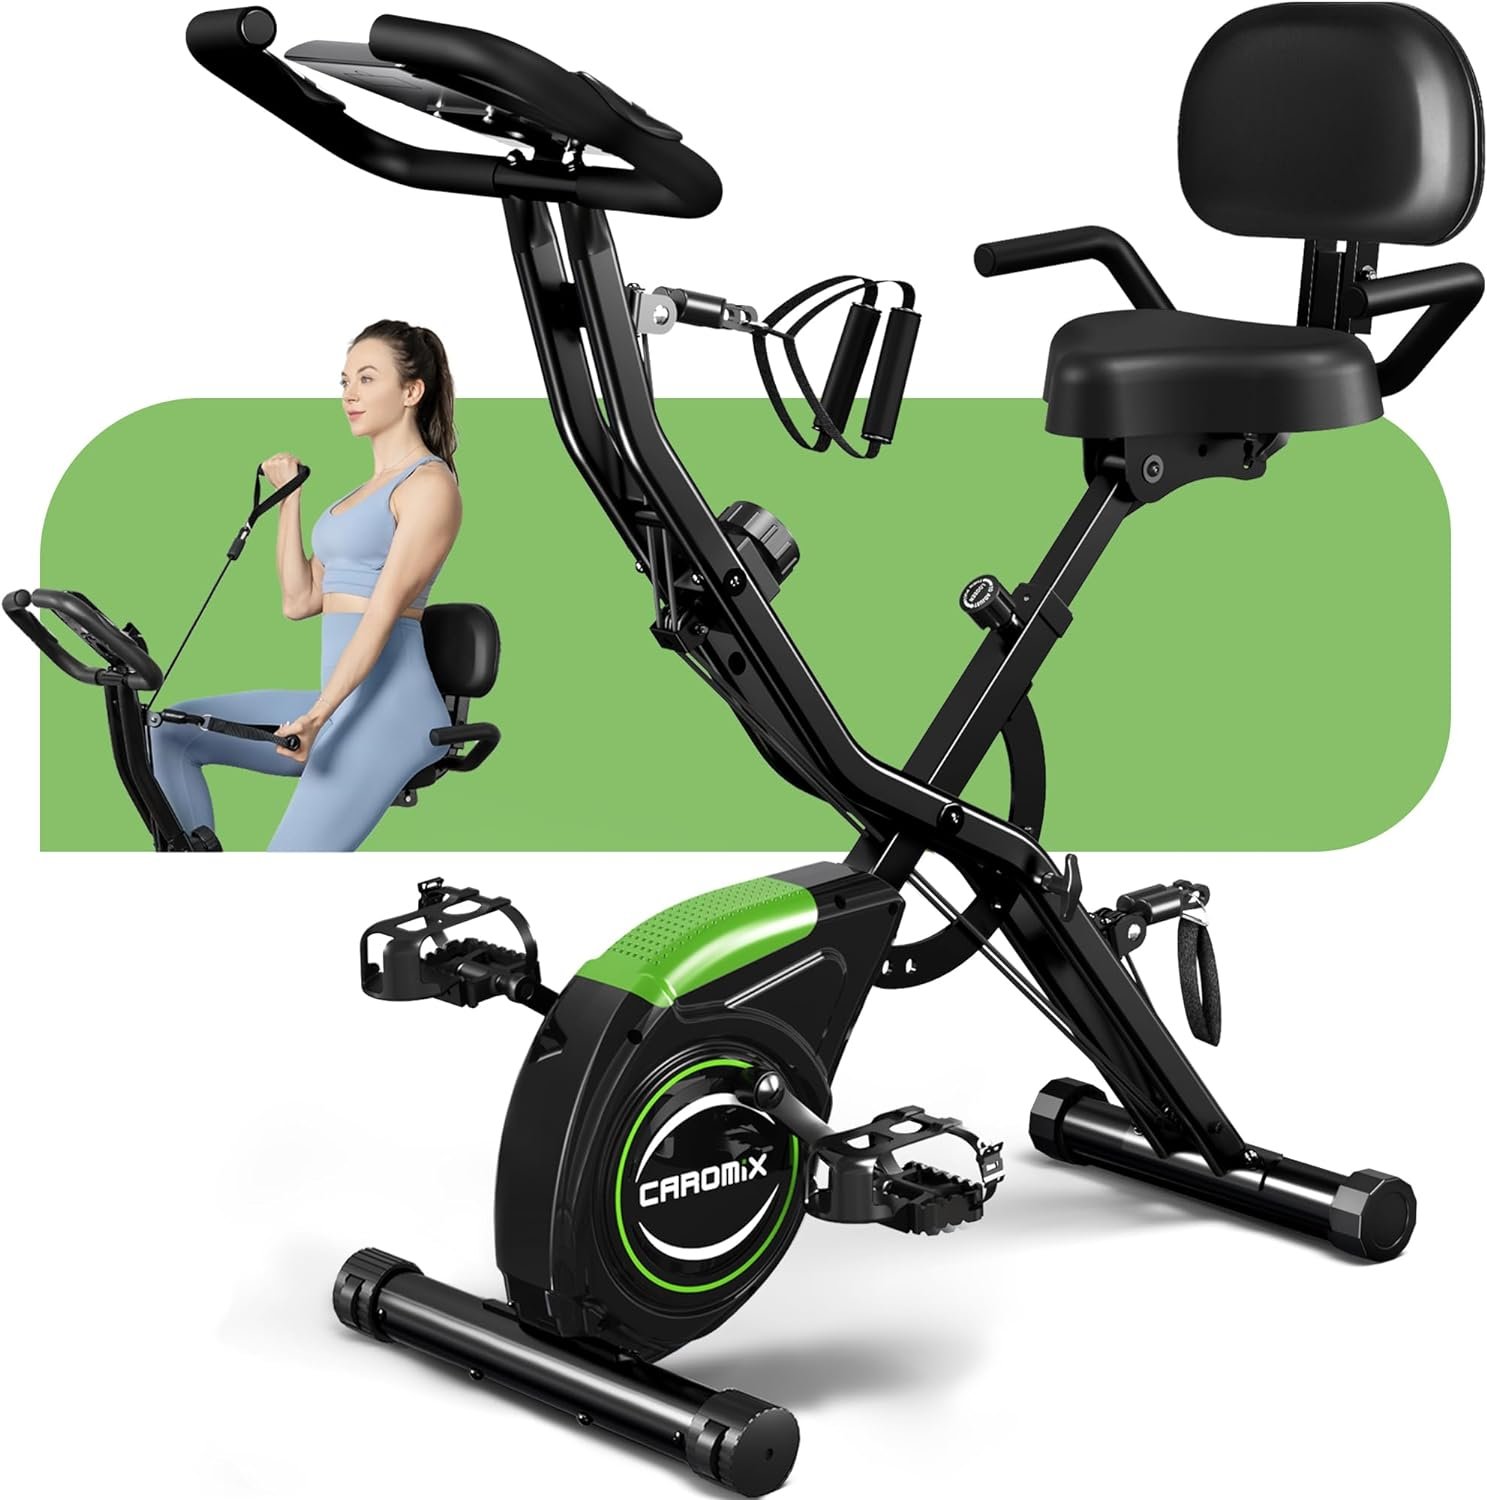 Caromix-Folding-Exercise-Bike Review